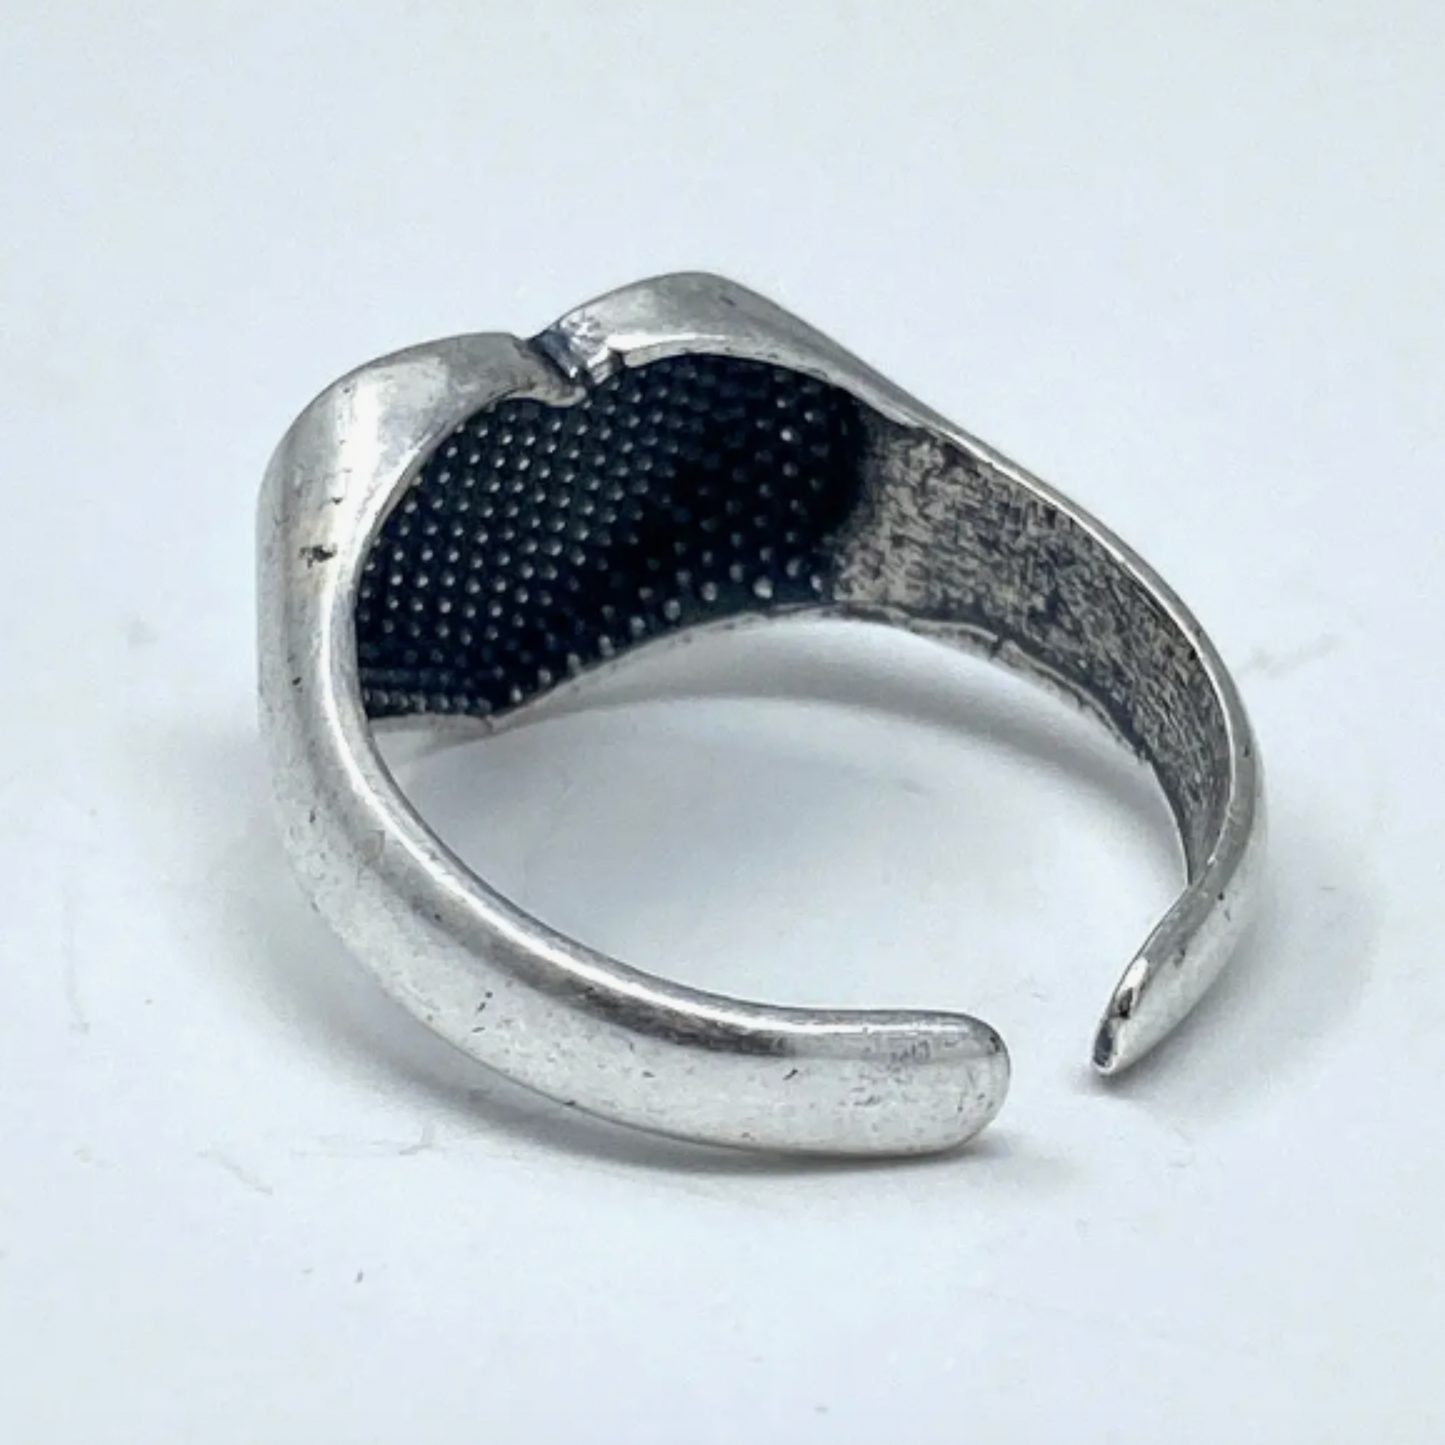 Gold or Silver Heart Adjustable Ring